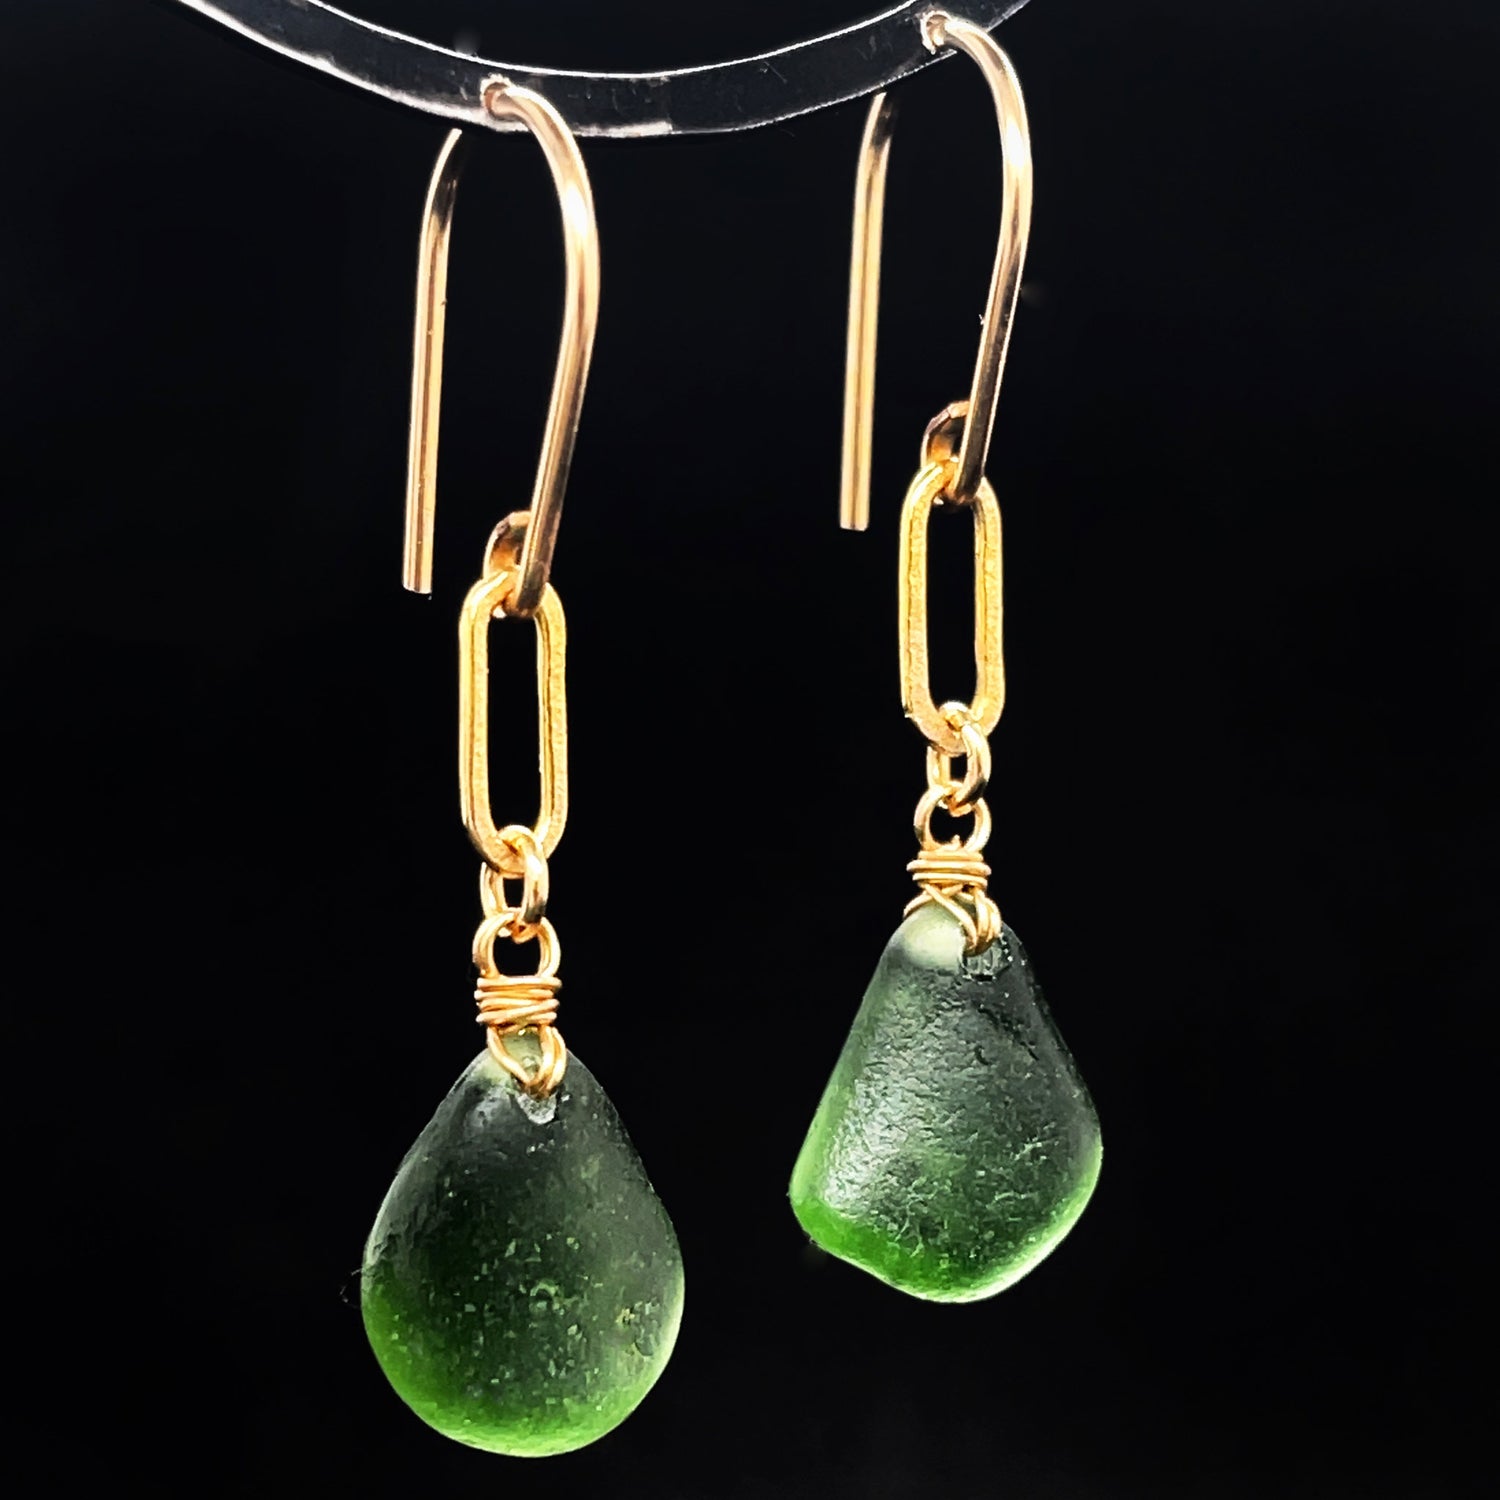 Handcrafted green glass earrings with matte gold finish - perfect for adding a pop of colour to any outfit